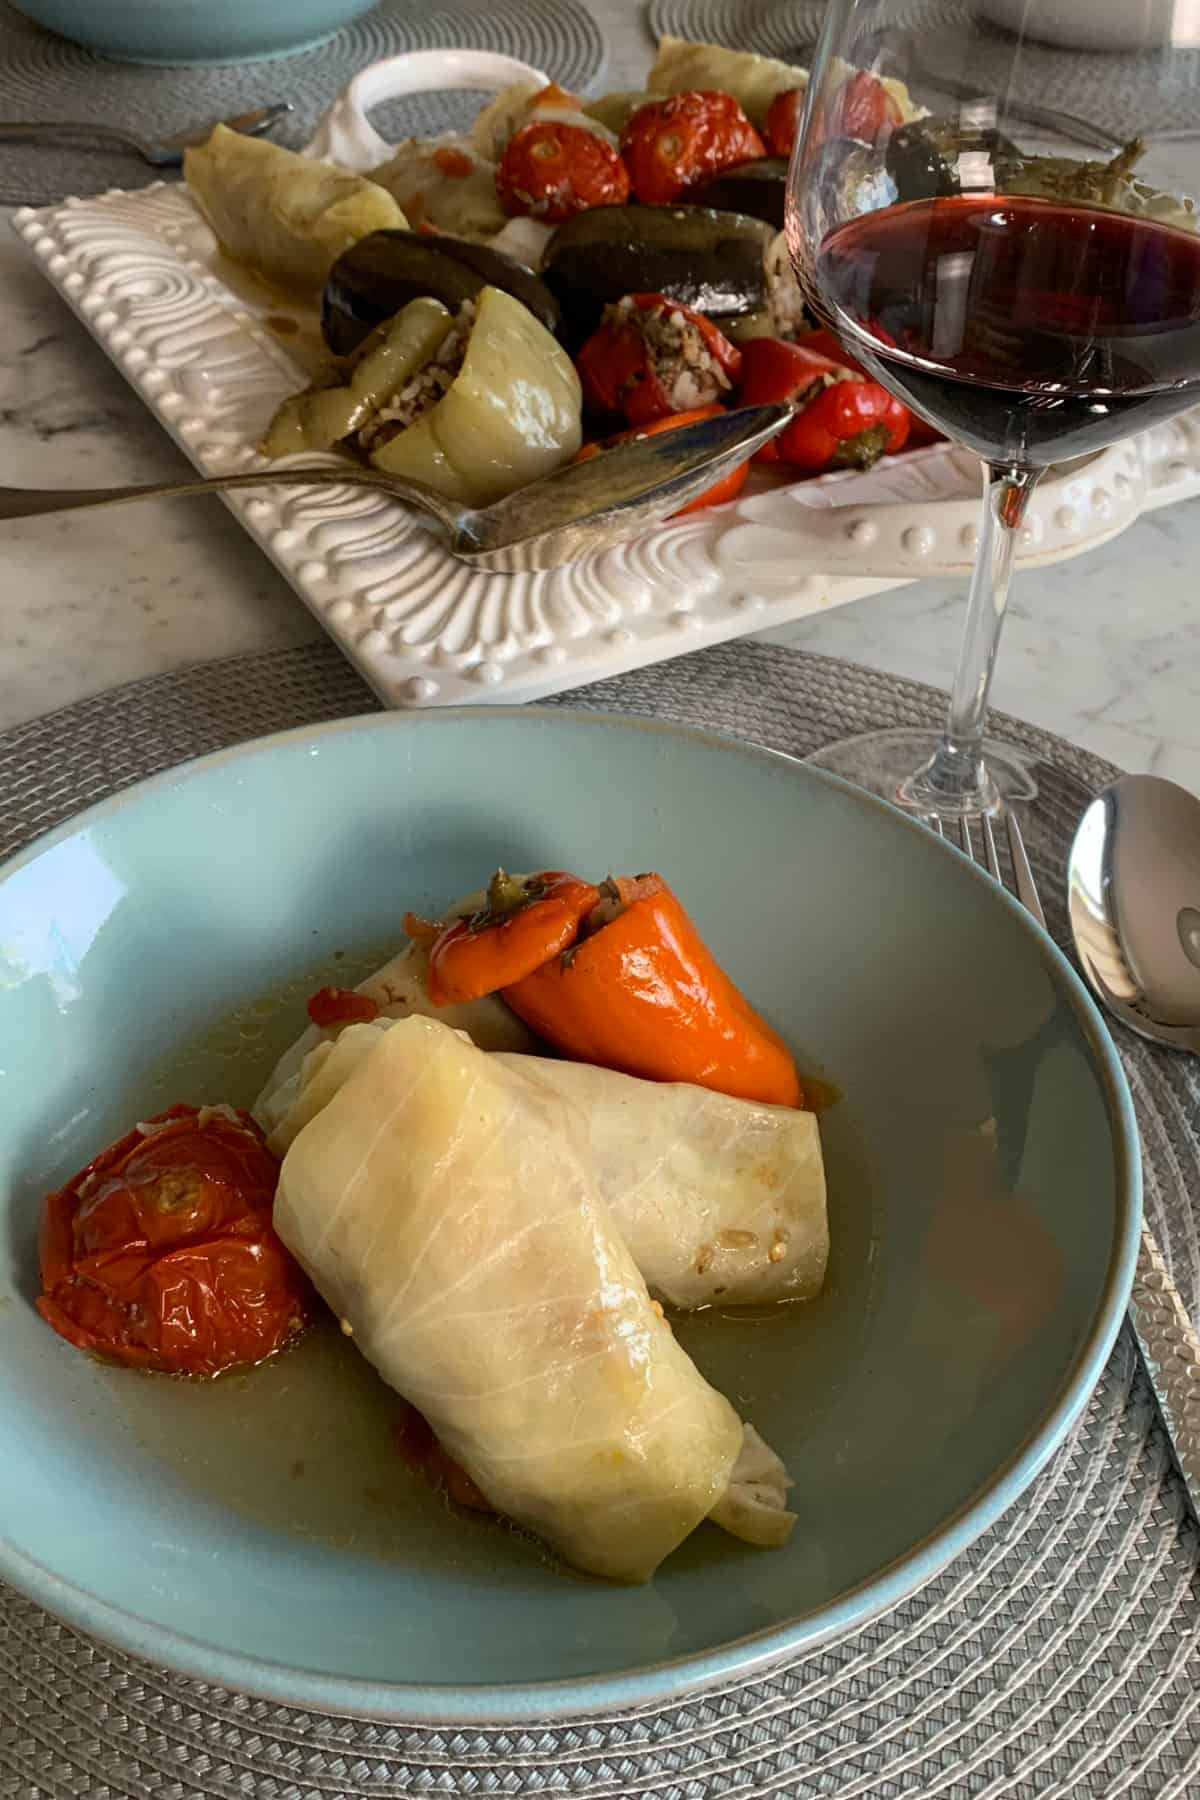 Stuffed cabbage, pepper, tomatoes in a light broth.